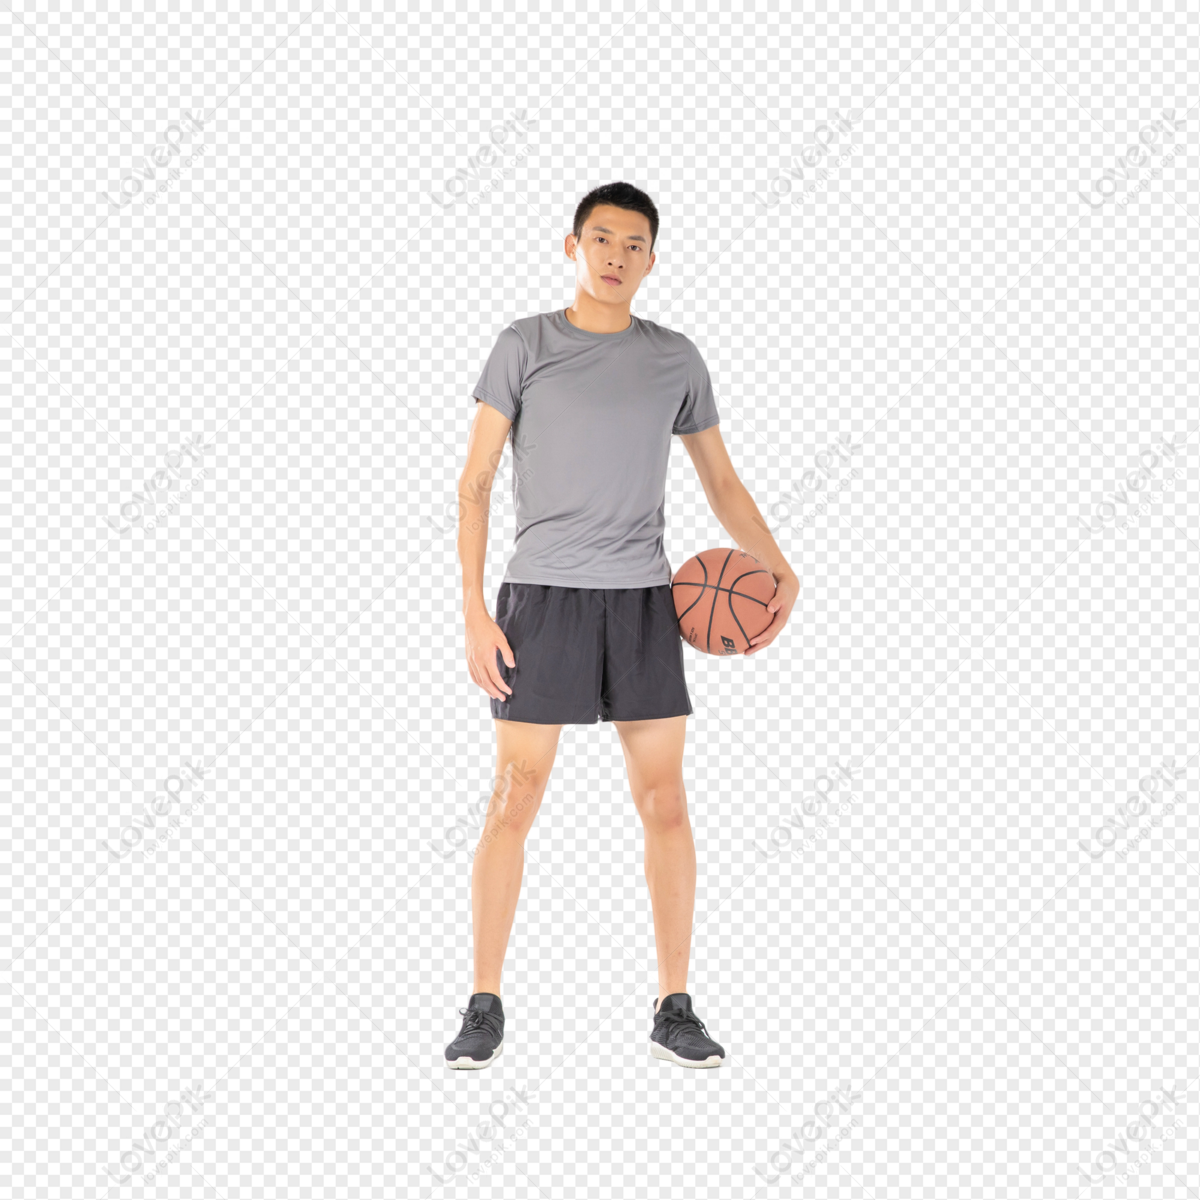 Basketball Player Character PNG, Vector, PSD, and Clipart With